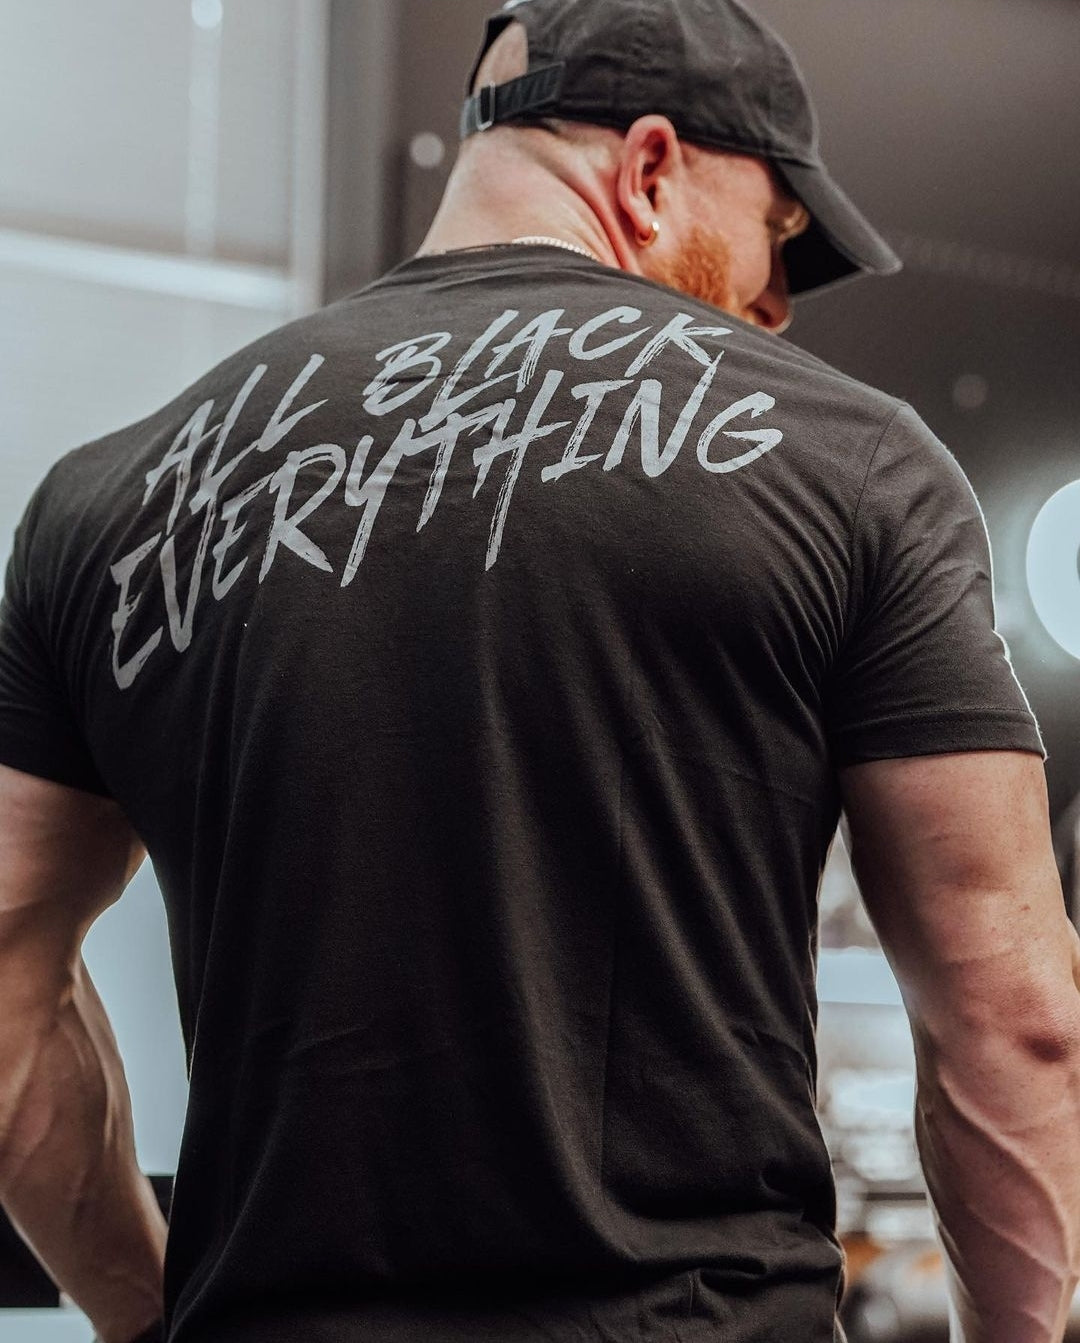 All Black Everything tee - BACK